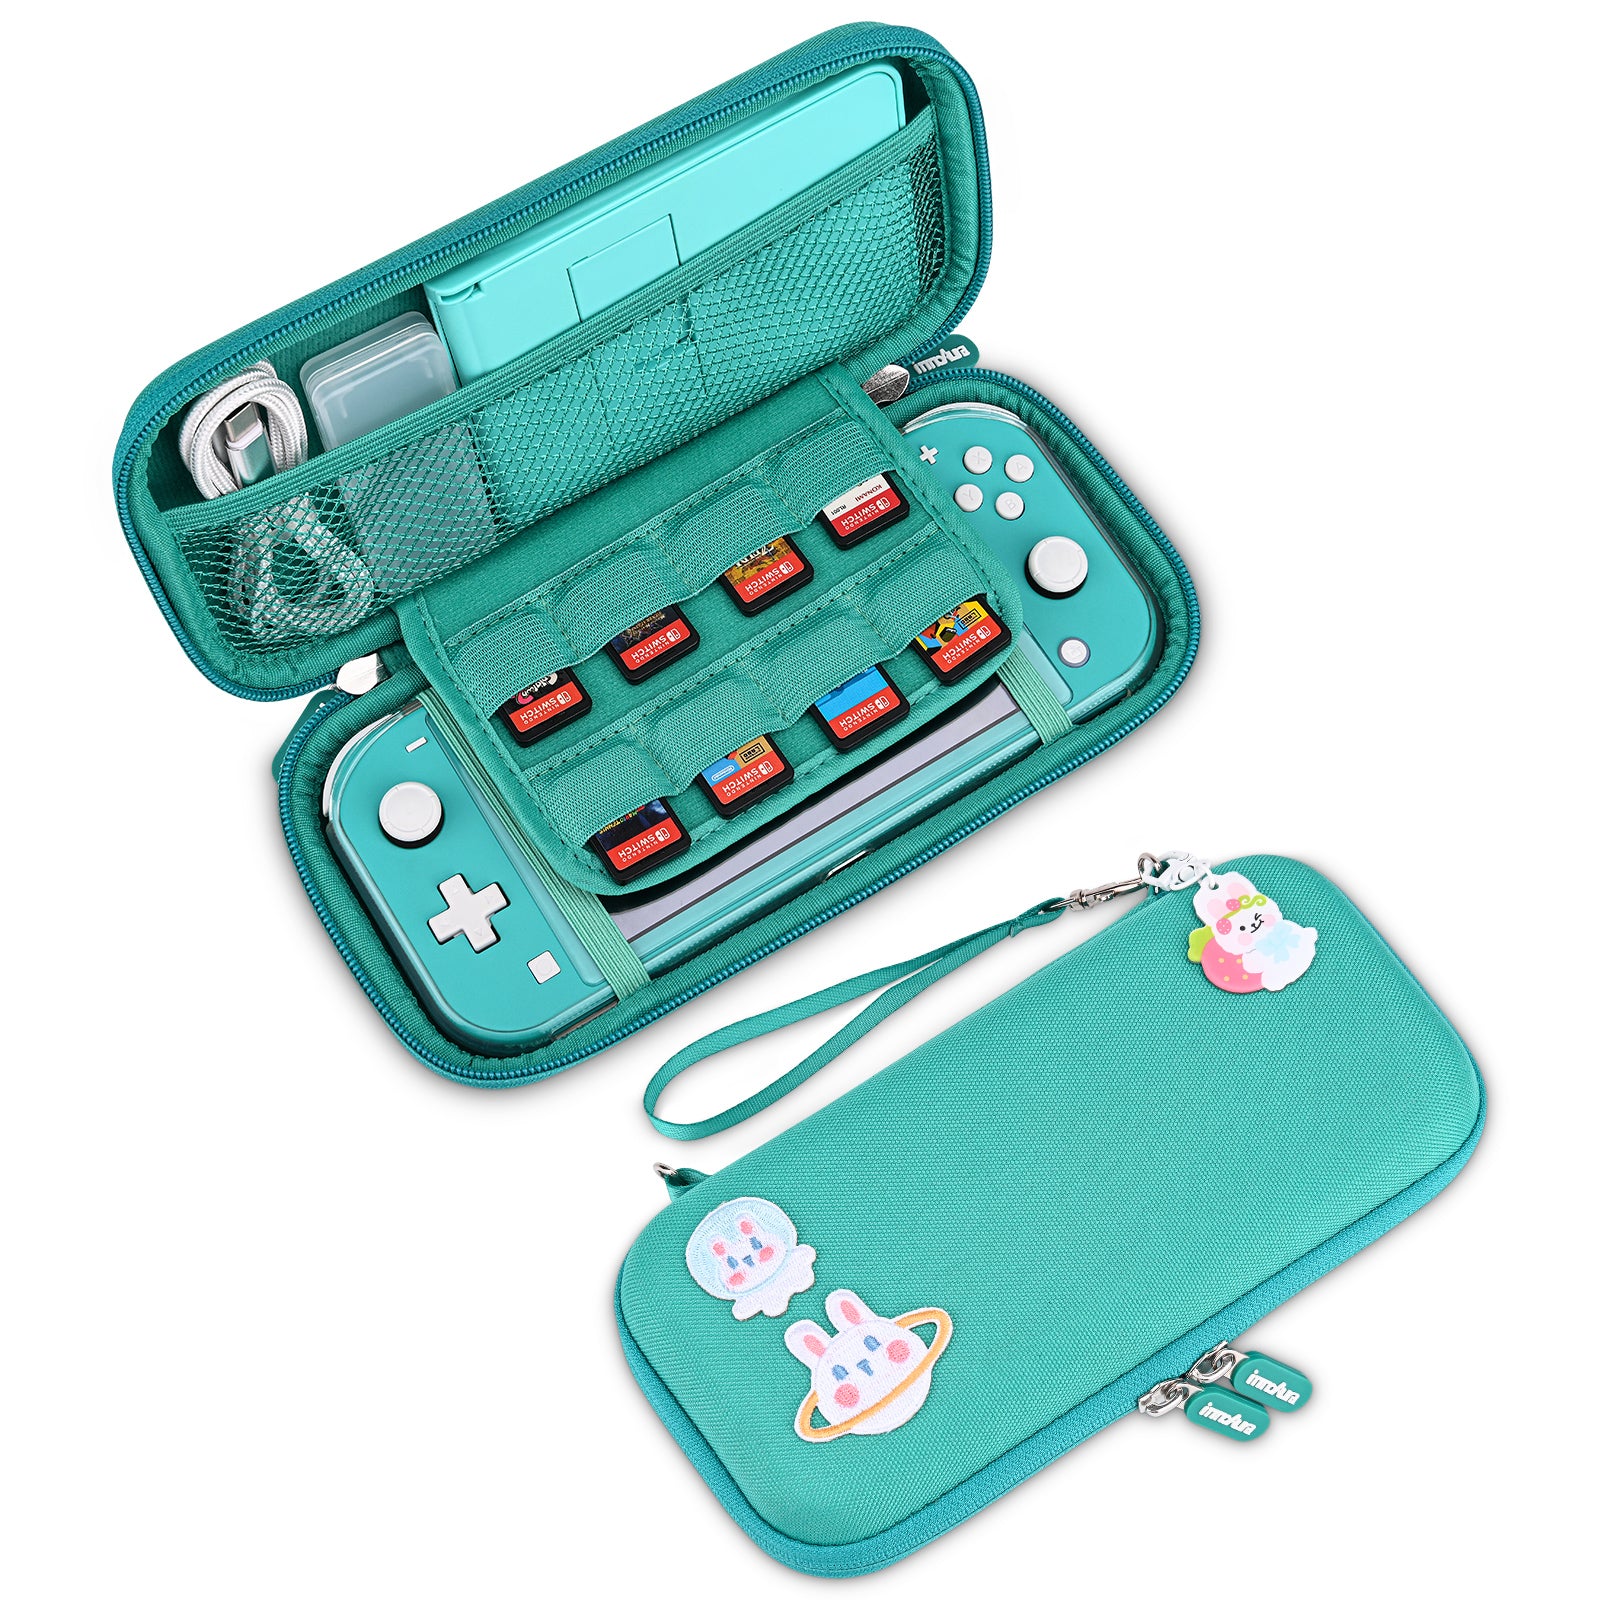 innoAura Nintendo Switch Lite Carrying Case, Switch Lite Cover